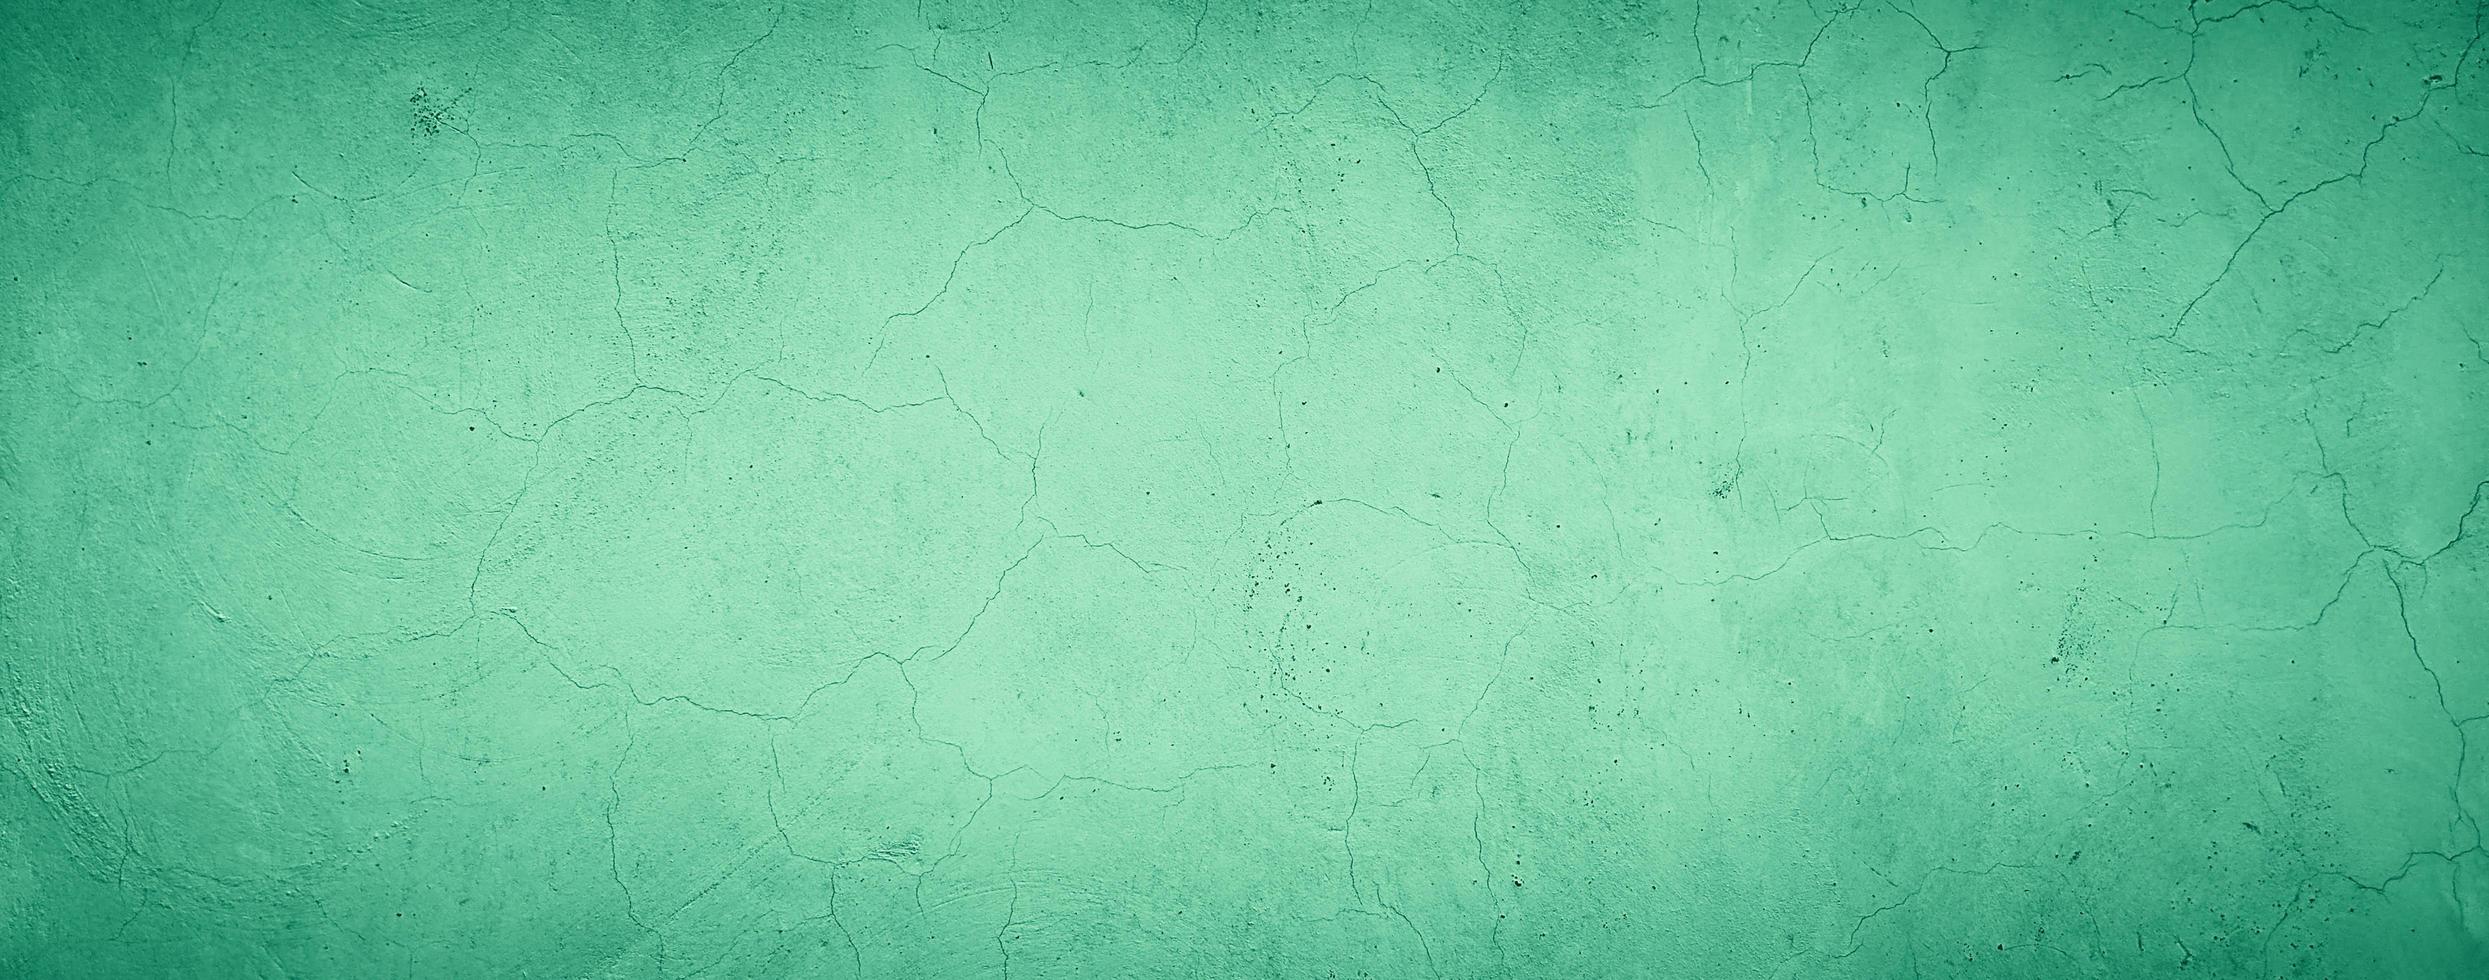 abstract grungy concrete wall texture background with green pastel color photo